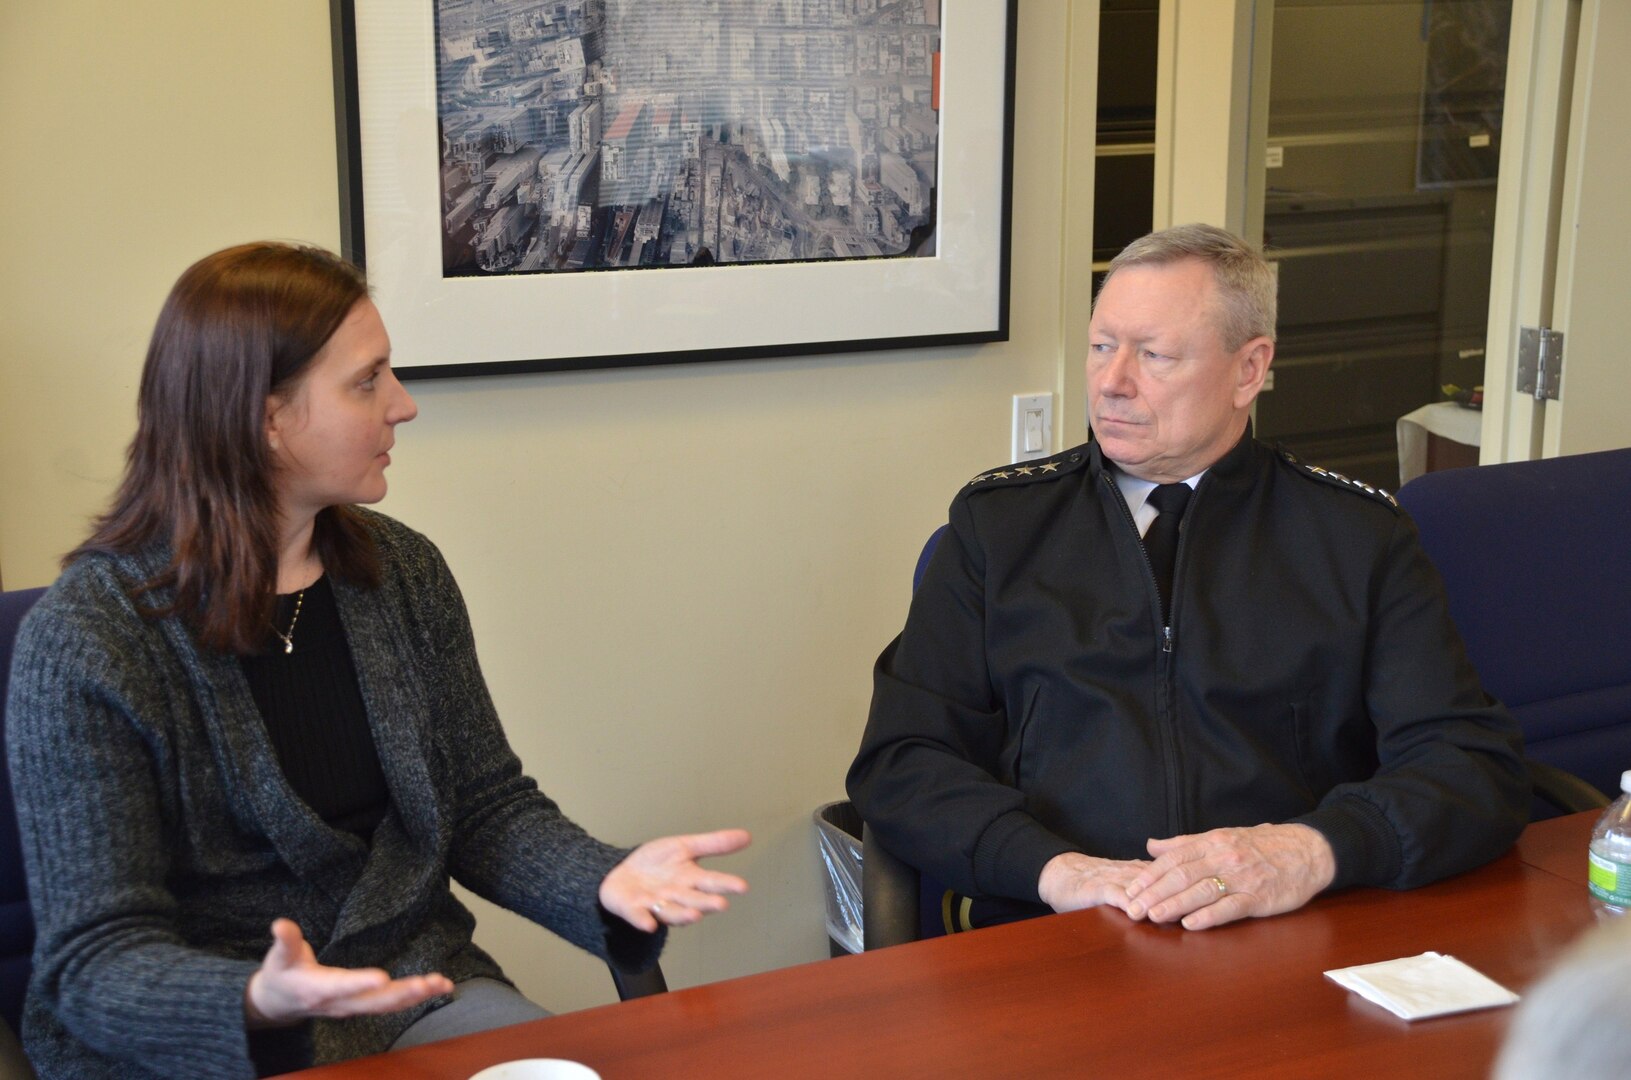 Gen. Frank Grass, chief of the National Guard Bureau, speaks with Jennifer Adams, CEO of the WTC Tribute Center, about including the story of the National Guard's response to the Sept. 11, 2001, attacks during a visit here on March 15.